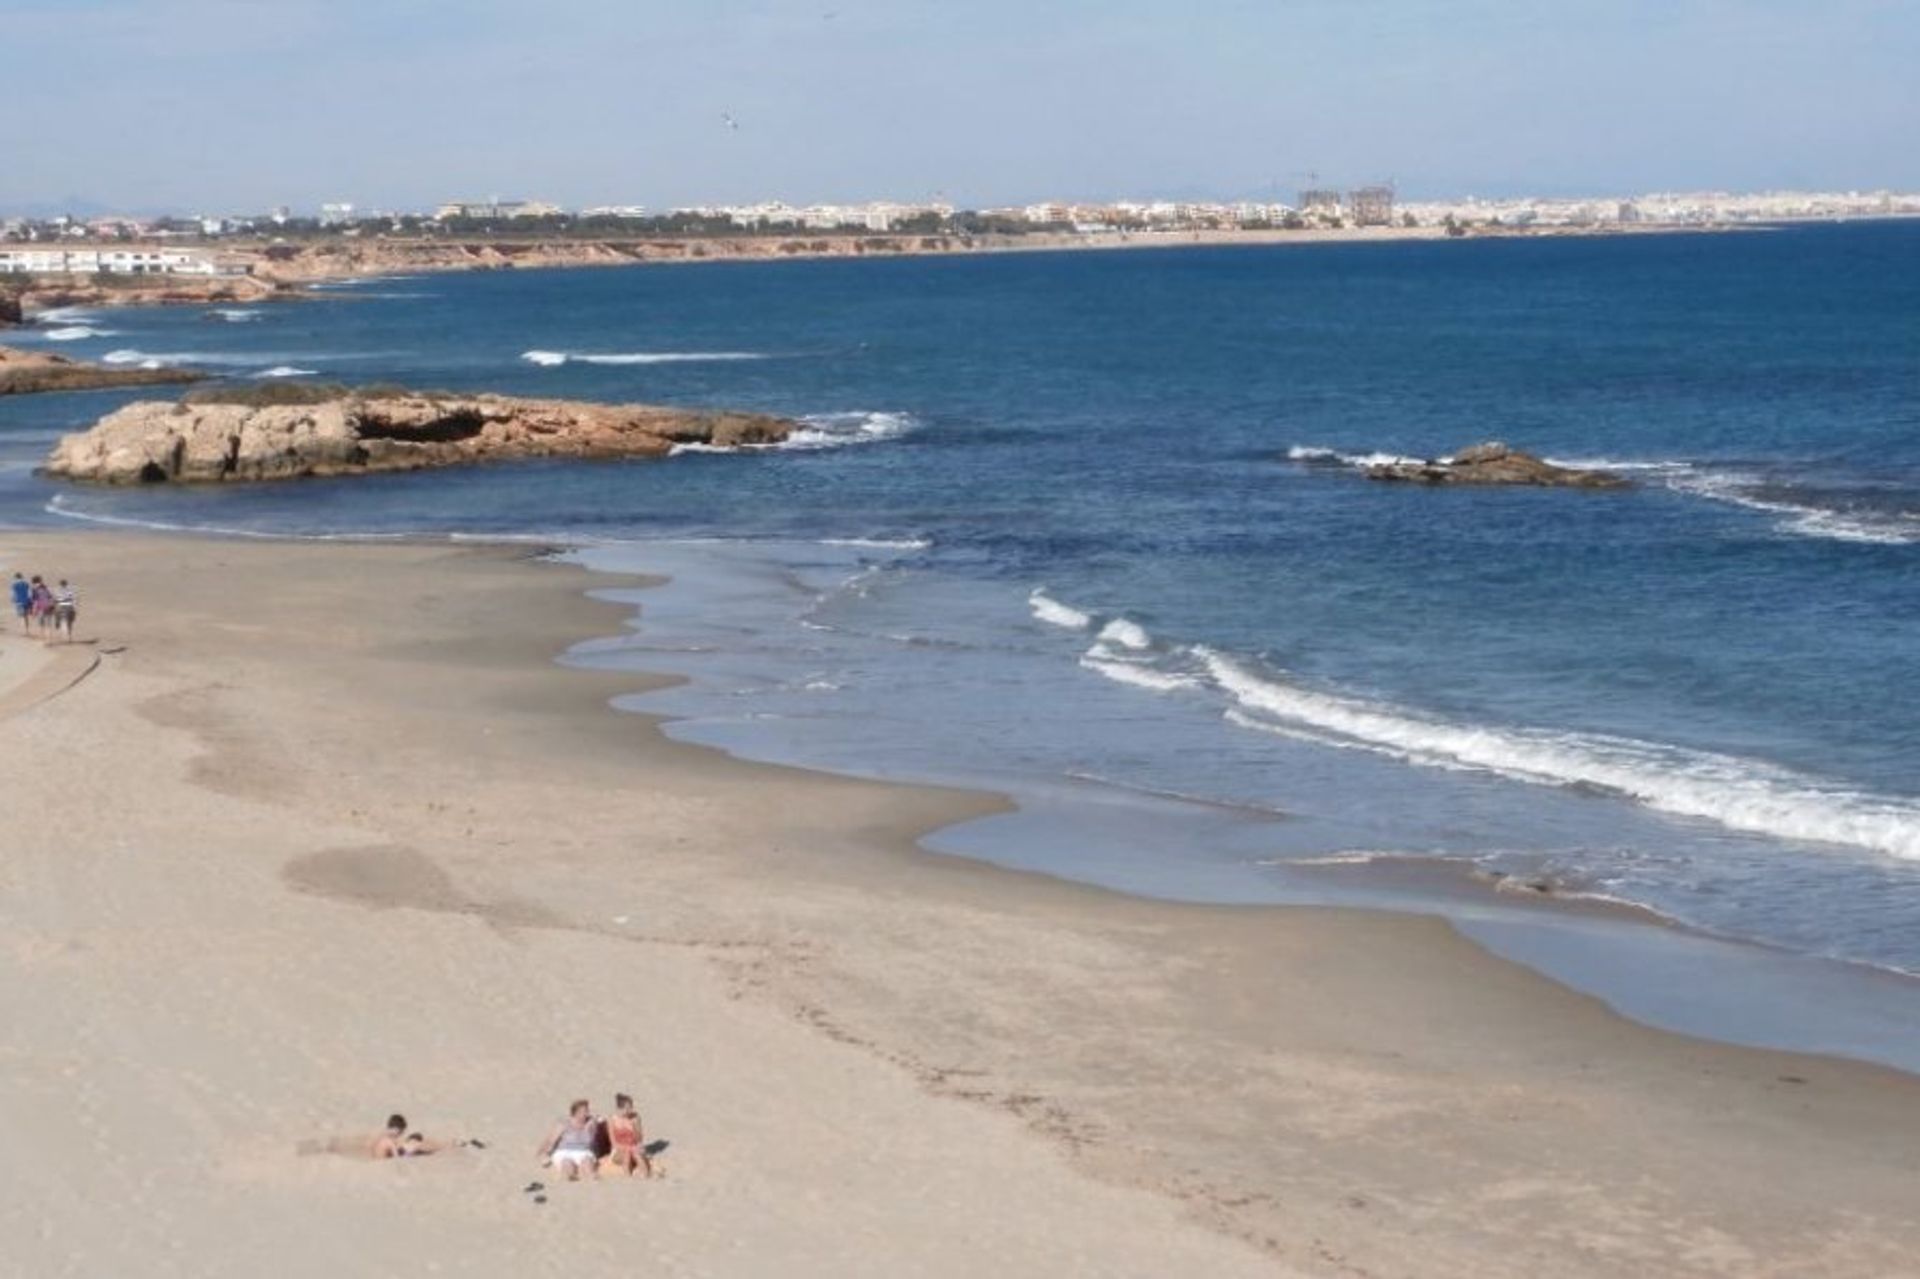 If you're after a peaceful day relaxing by the coast, look no further than local La Caleta beach 